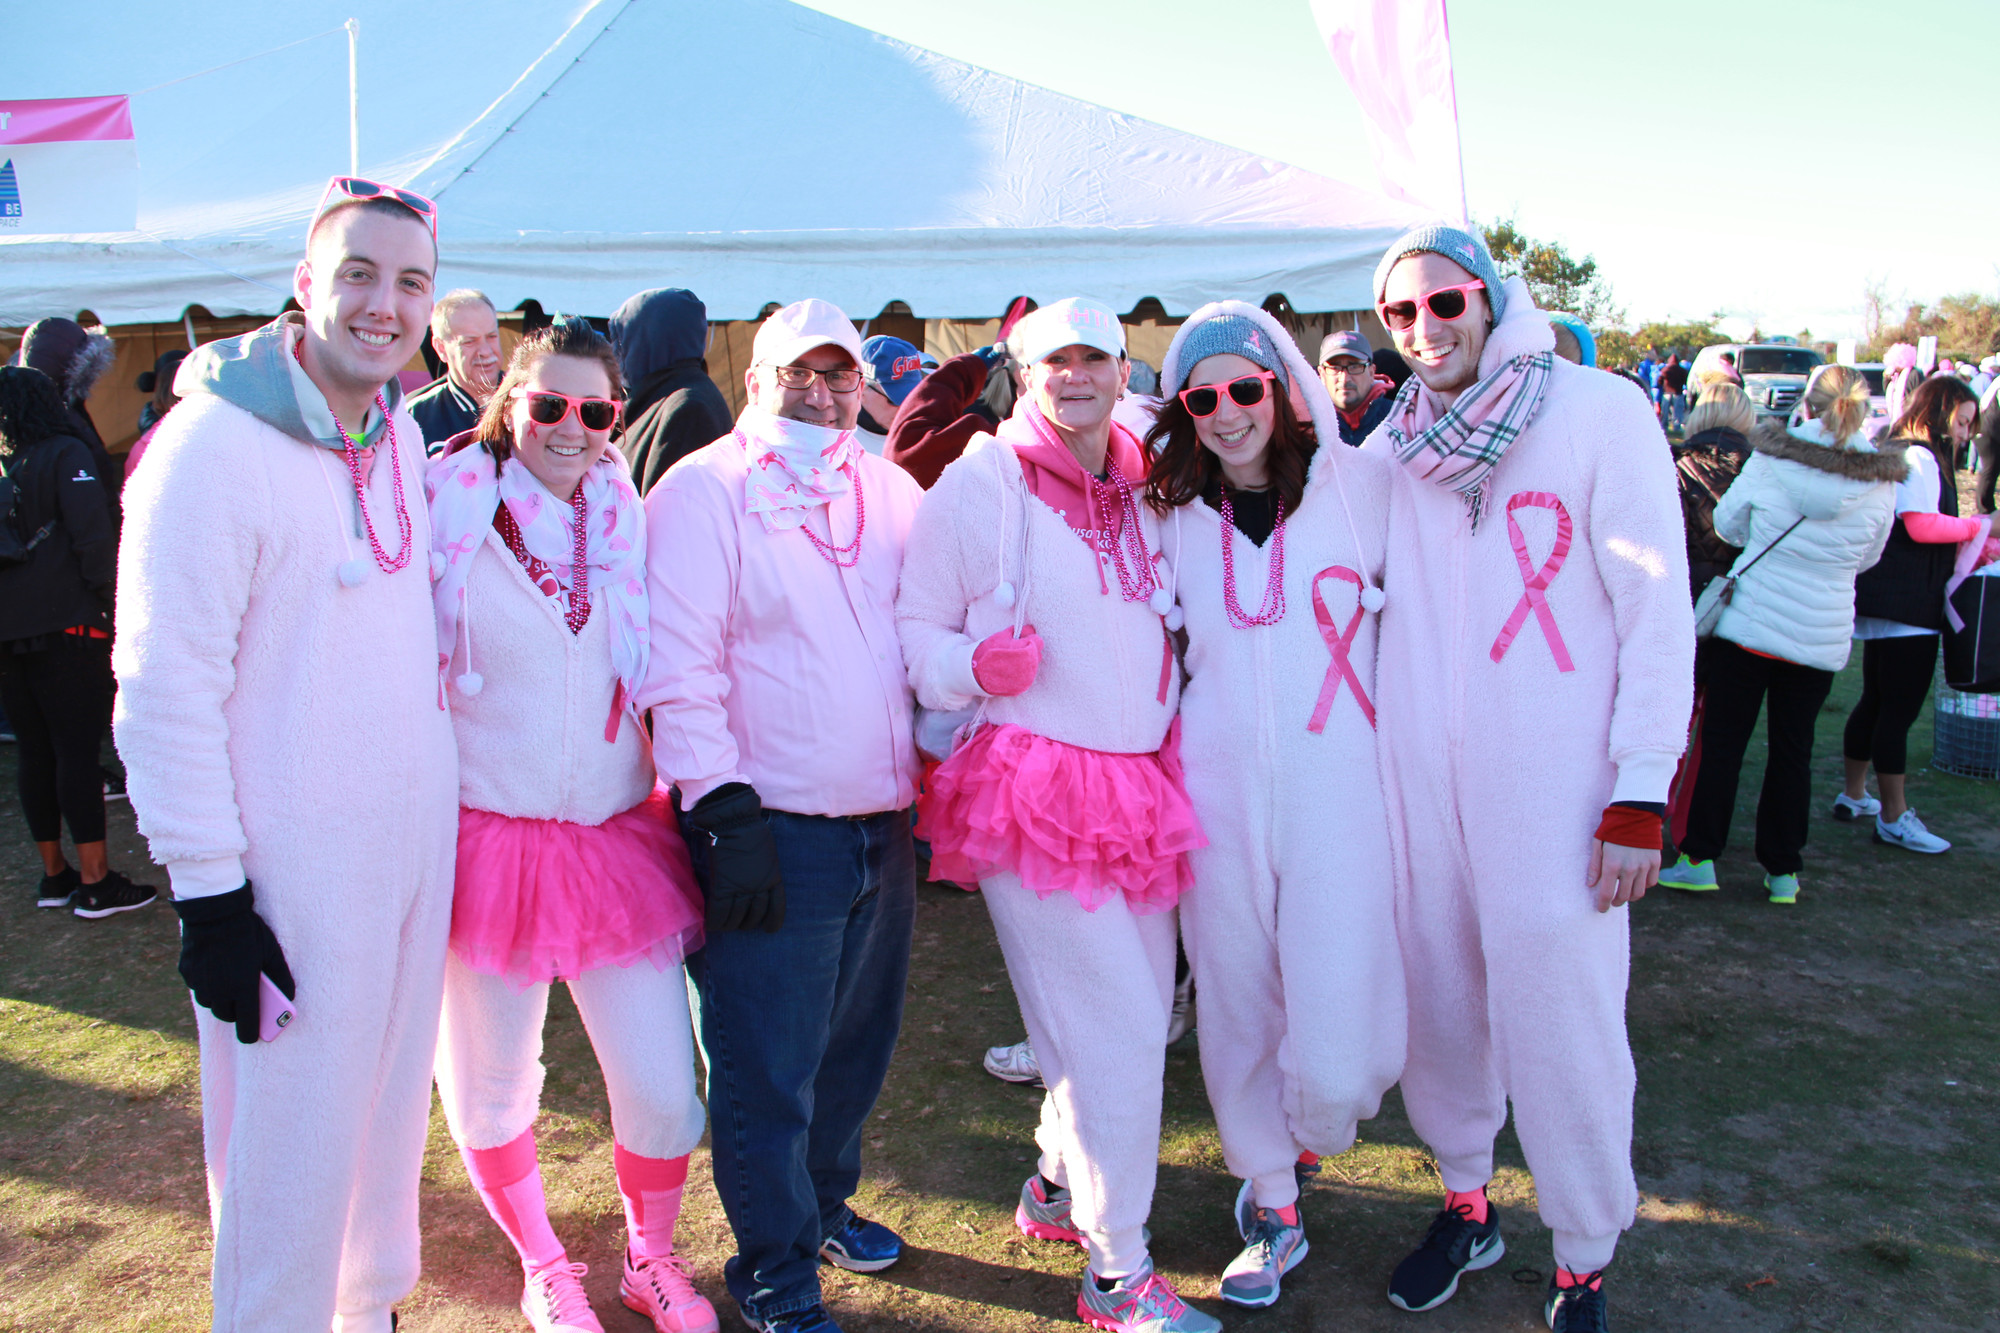 Members of the Breast Cancer Society showed their support at Sunday morning’s walk at Jones Beach.